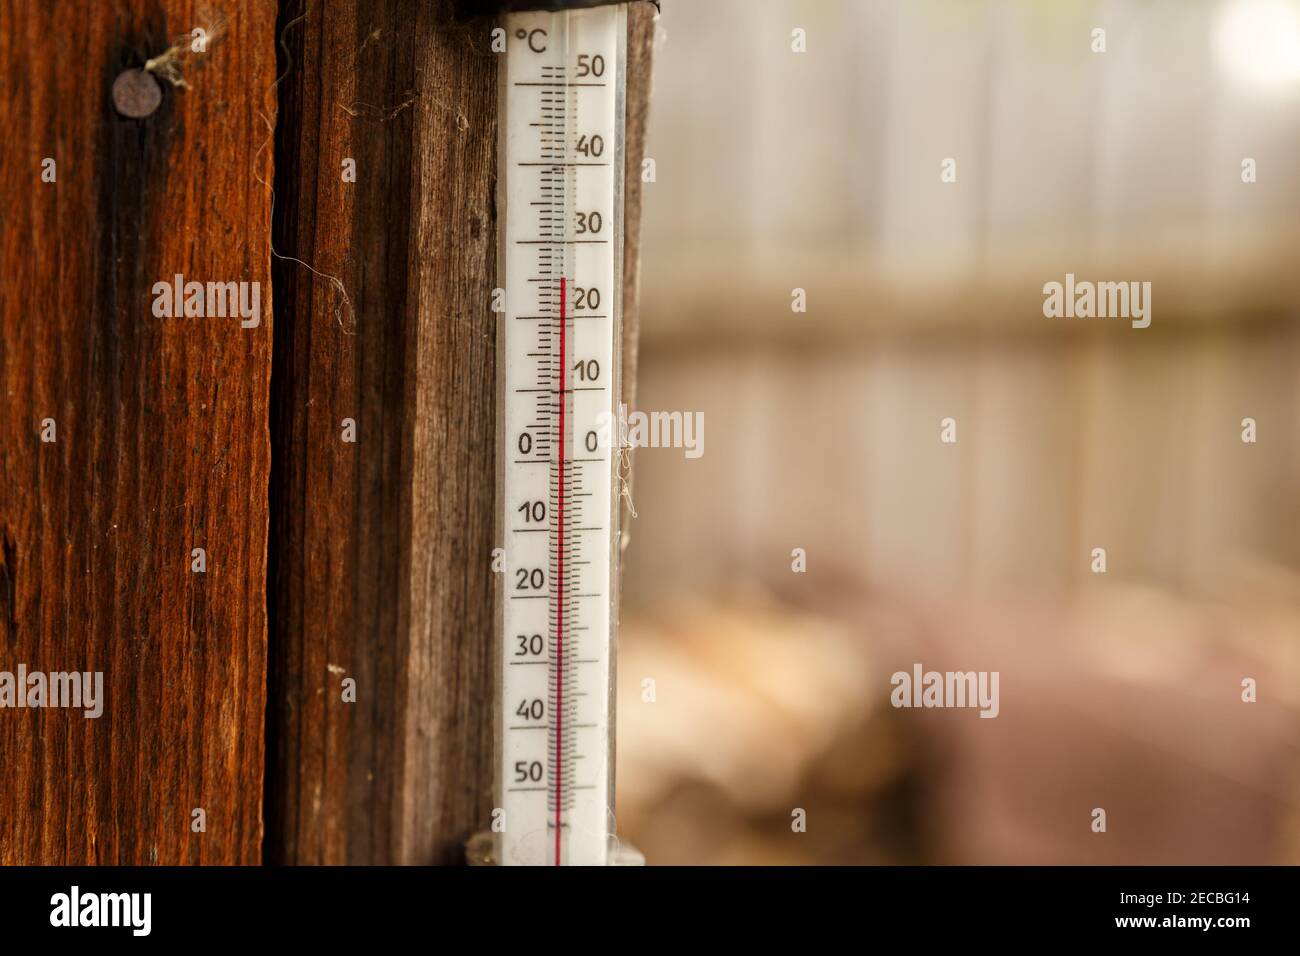 https://c8.alamy.com/comp/2ECBG14/a-street-thermometer-hangs-on-the-wall-of-a-wooden-house-2ECBG14.jpg